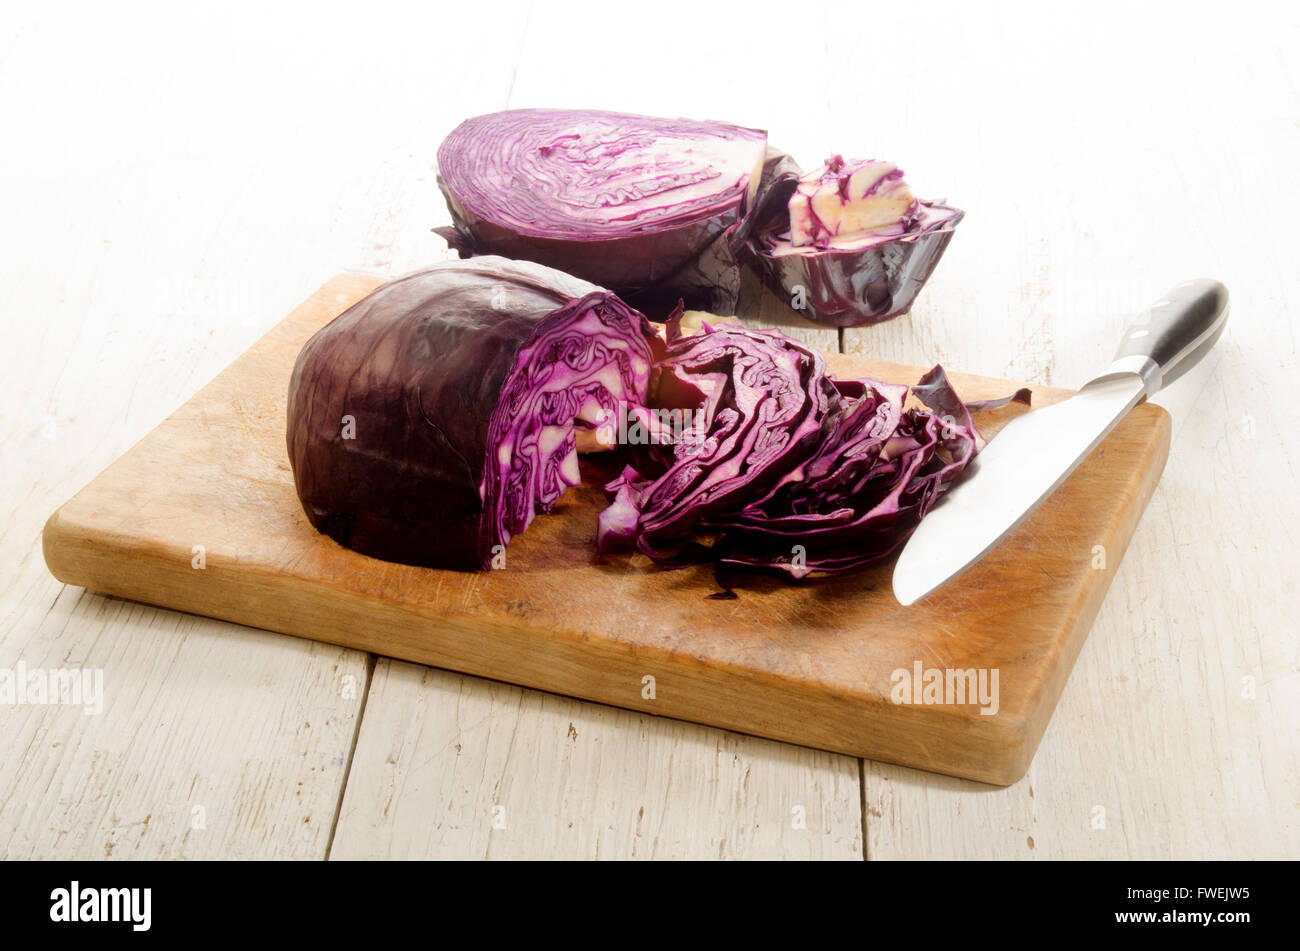 organic red cabbage prepared and sliced on a wooden board Stock Photo